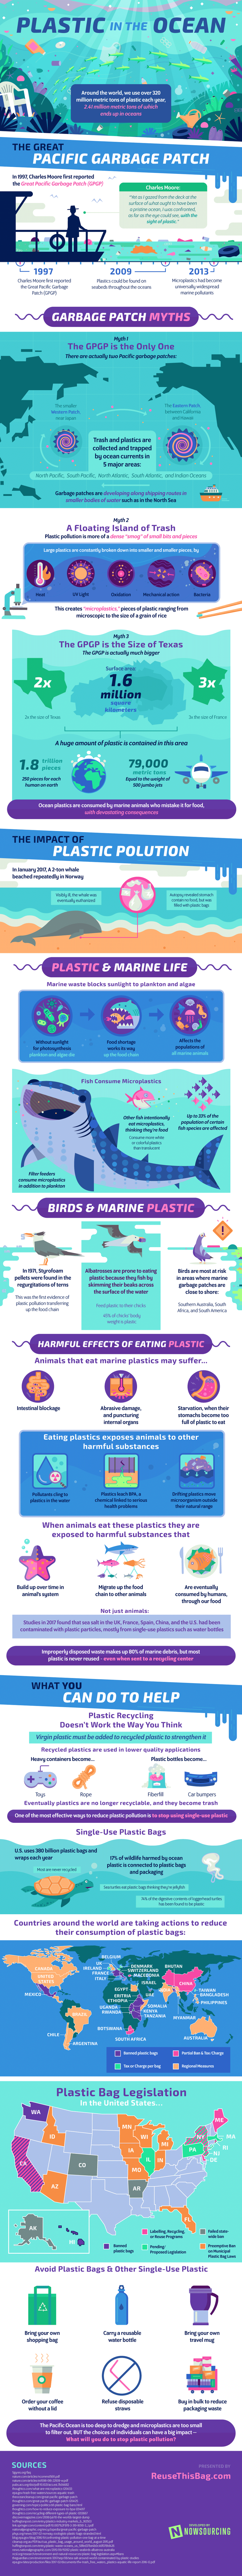 infographic on plastic wastage